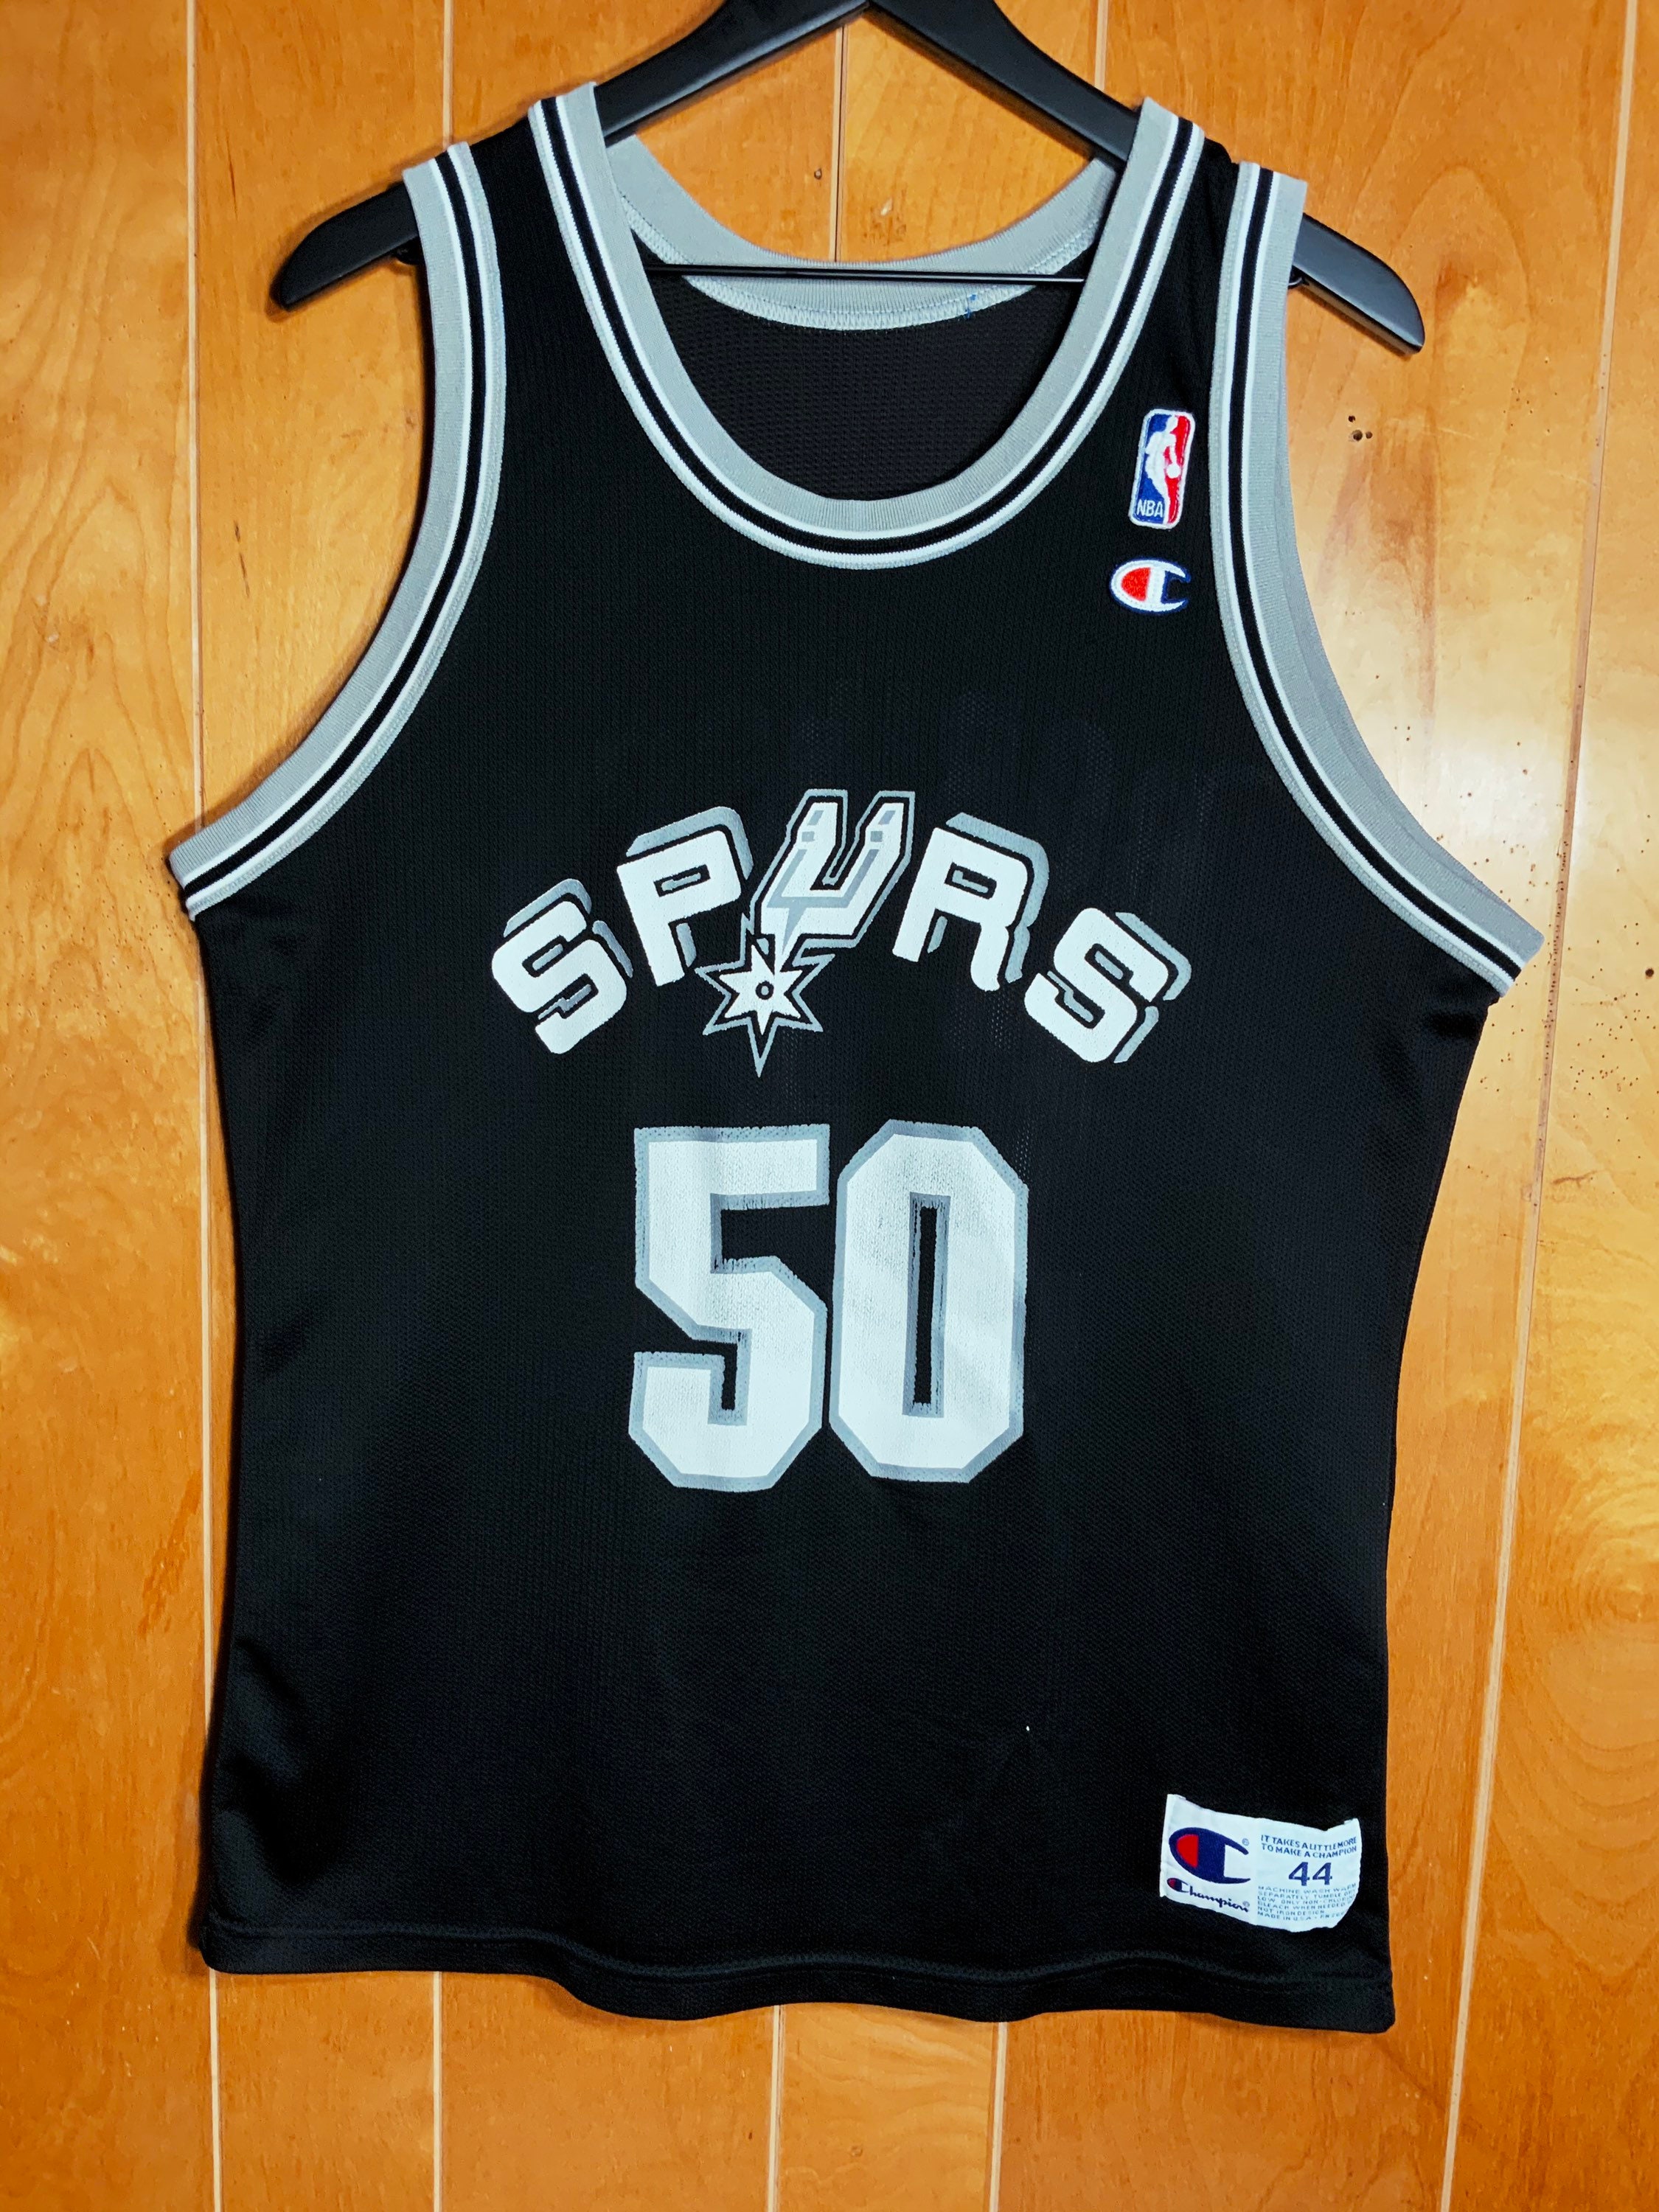 Fiesta-styled Spurs jersey concept I made. Thoughts? : r/nba